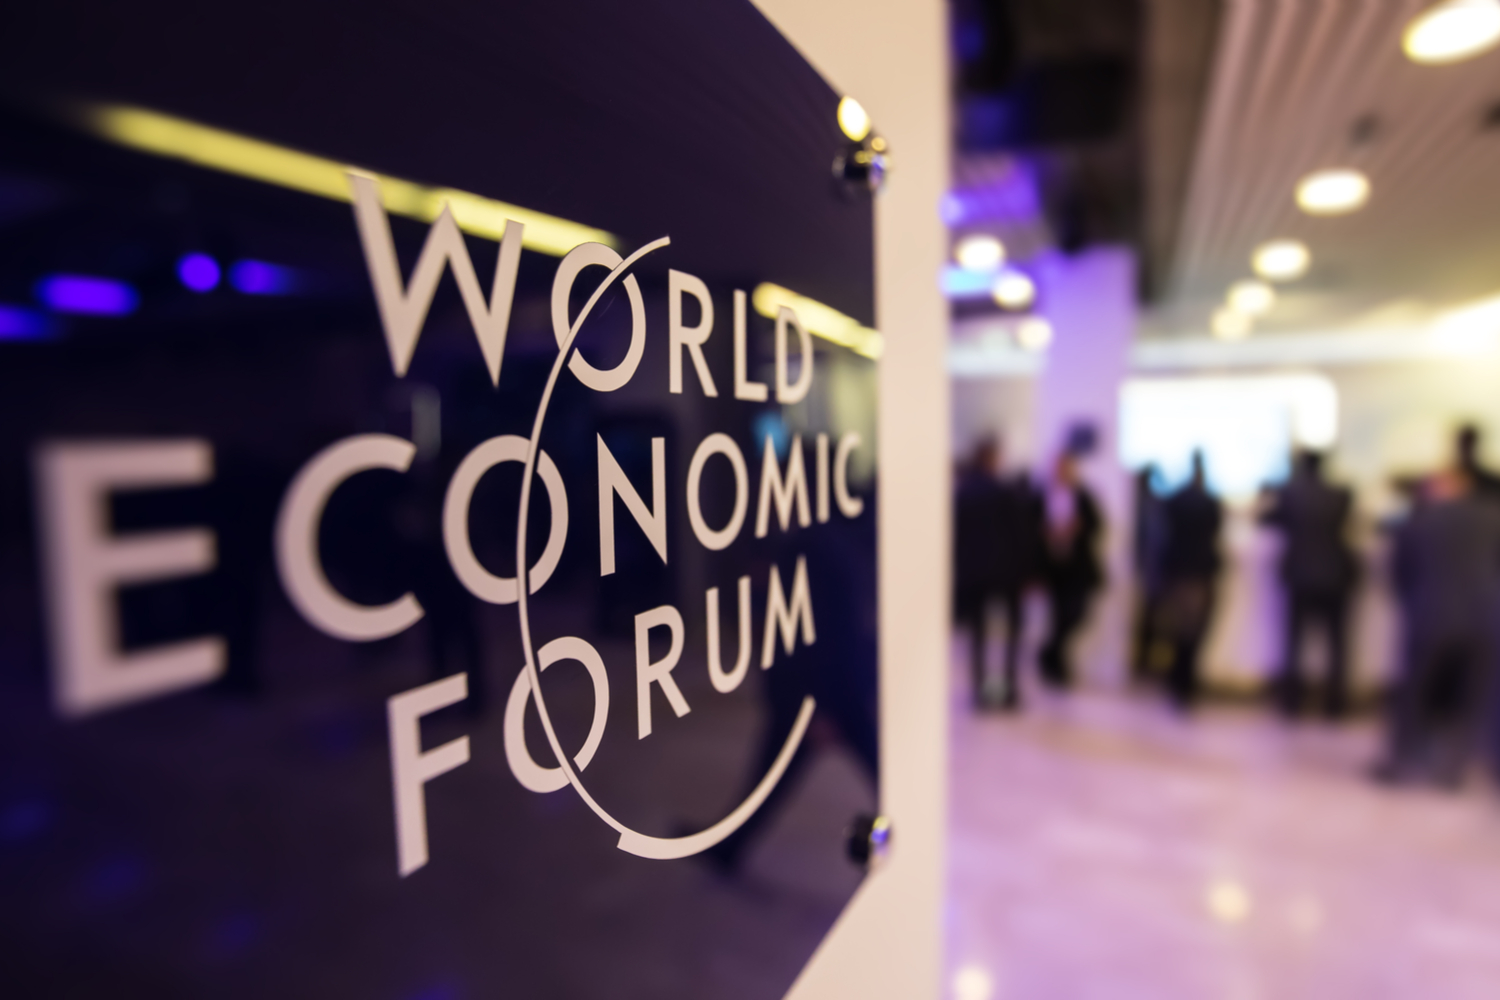 Over 40 Central Banks Are Considering Blockchain Currencies: Davos Report